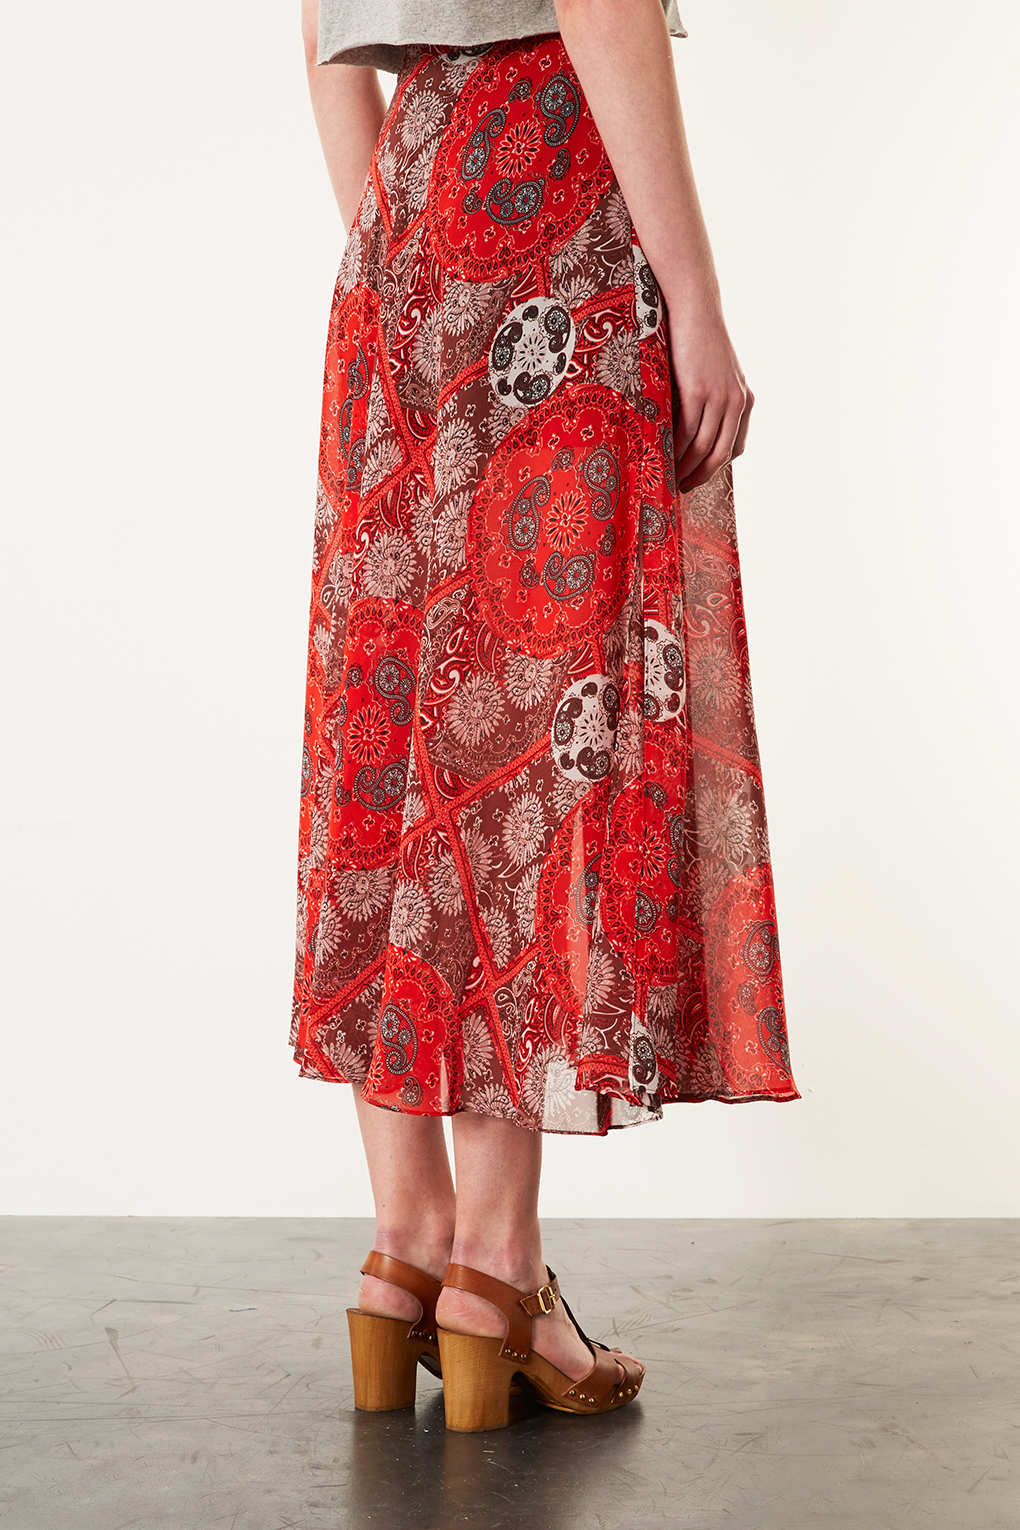 Lyst - Topshop Red Bandana Print Maxi Skirt in Red